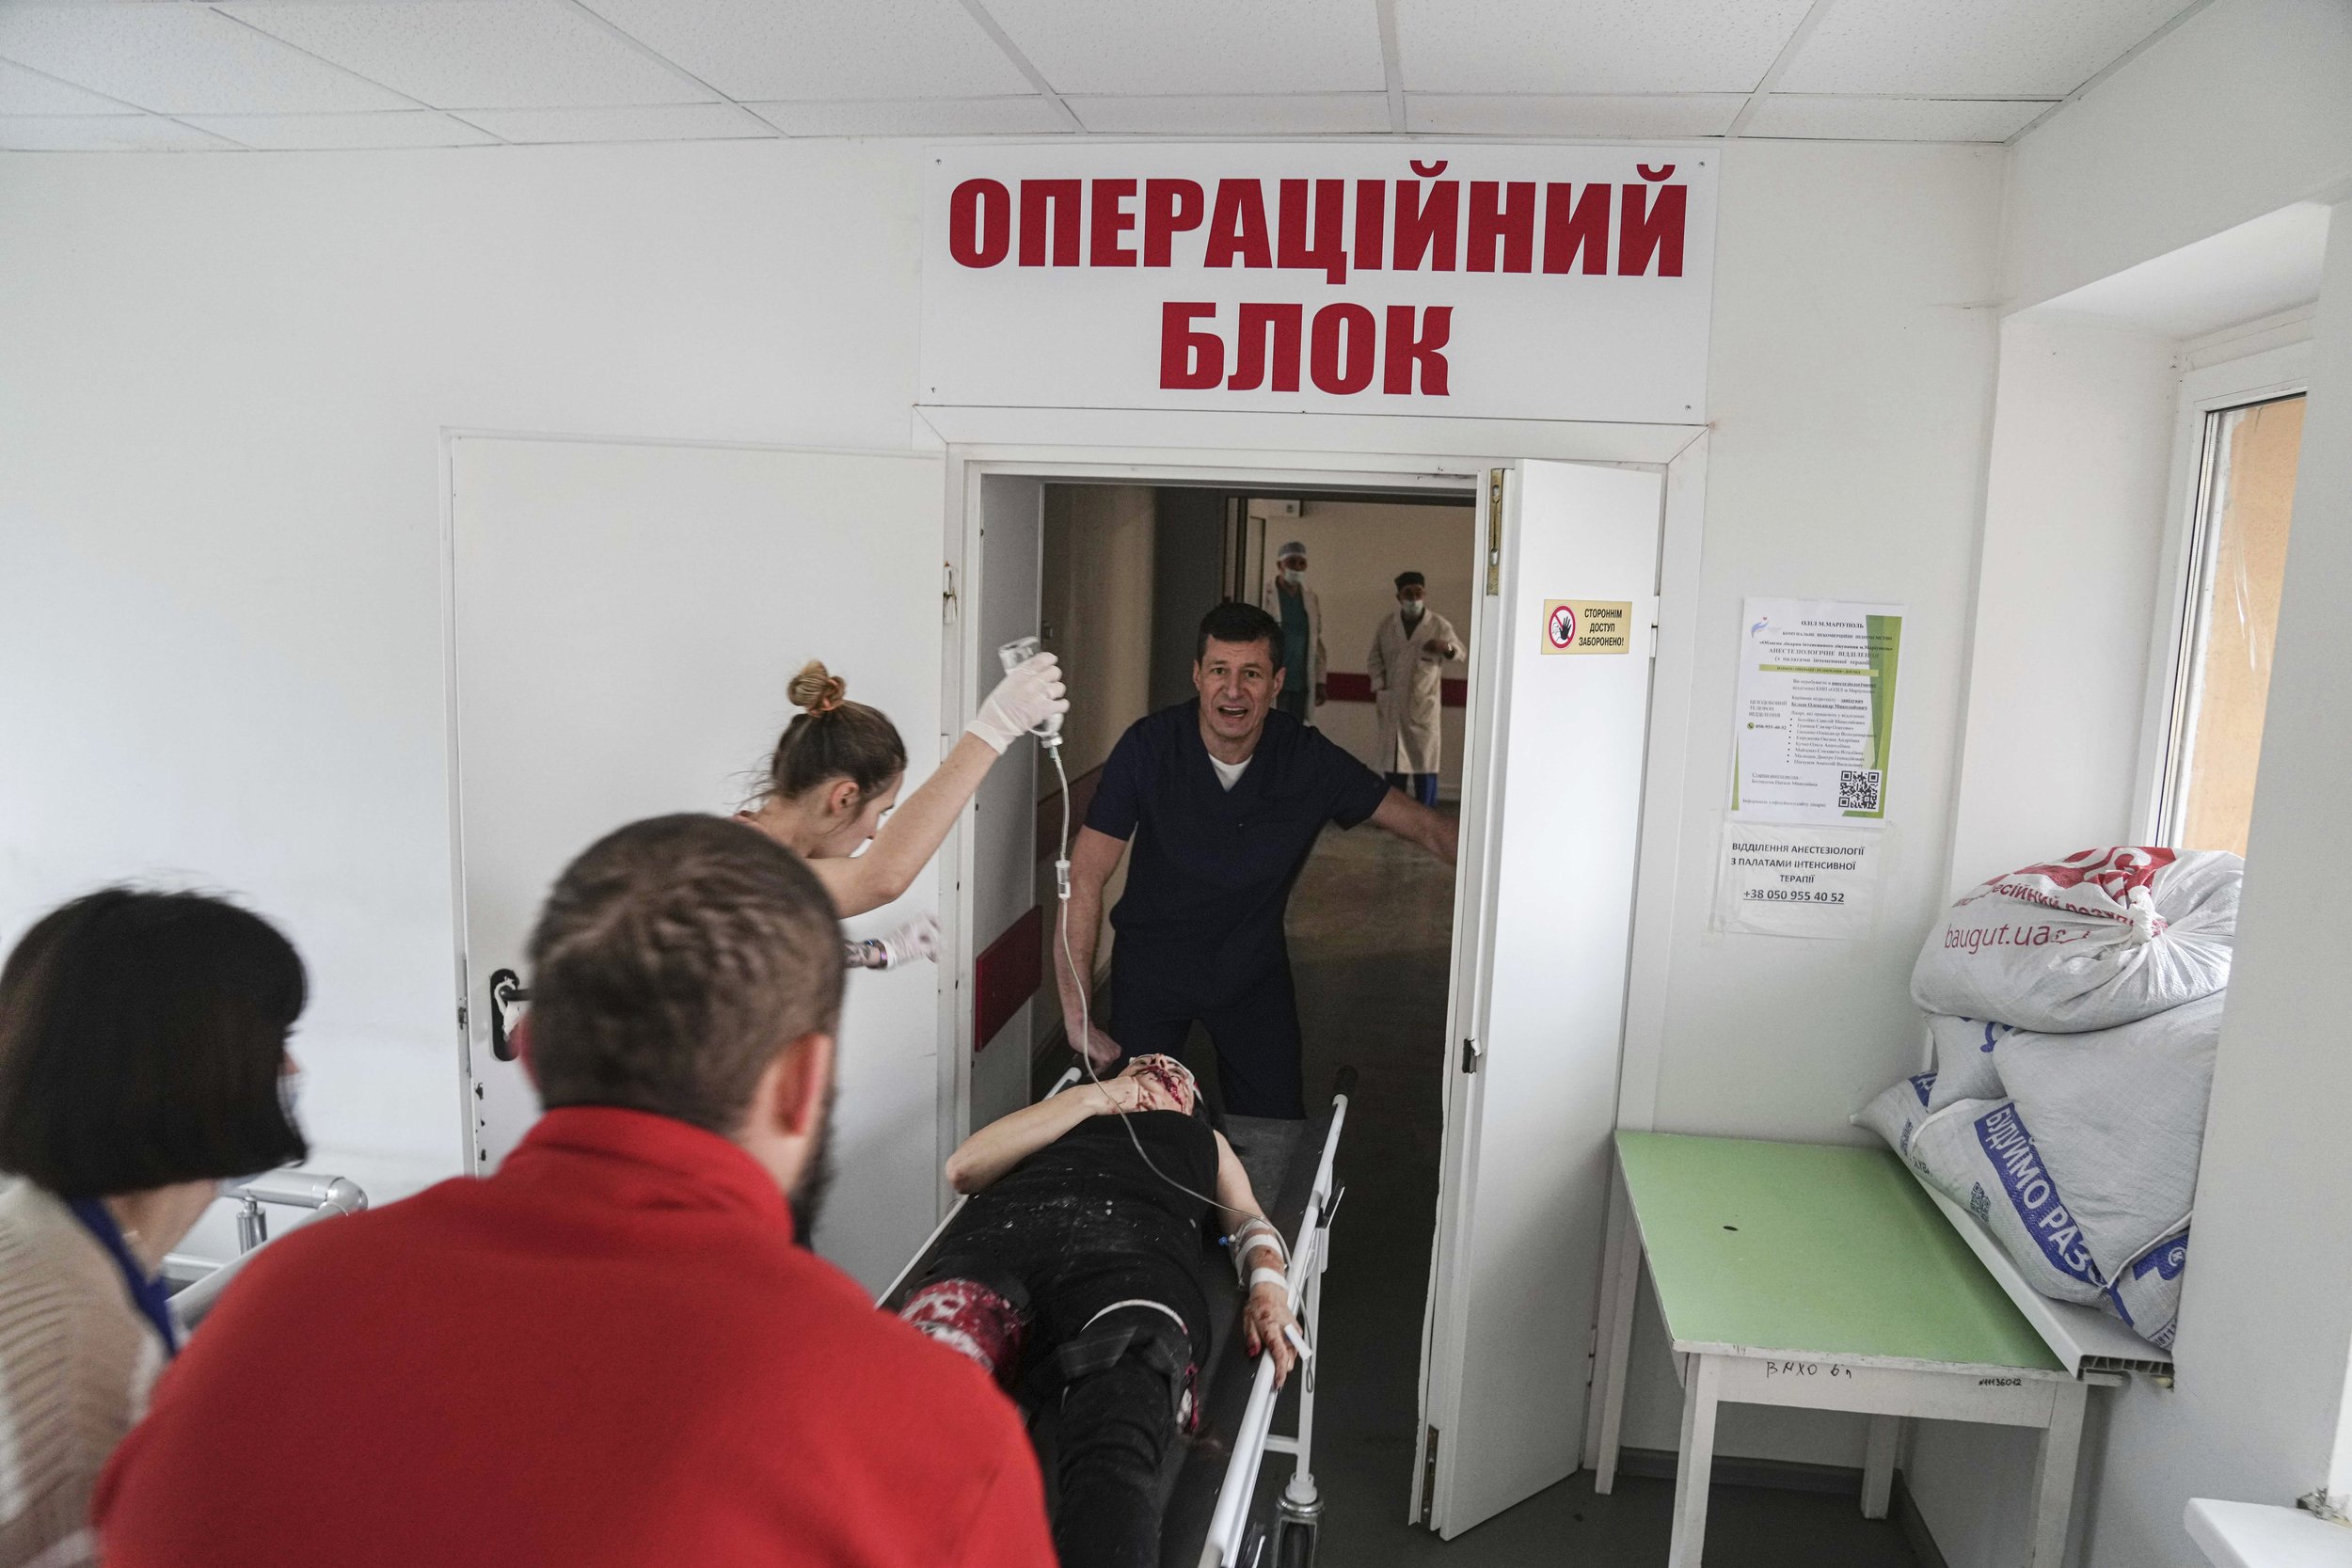  Oleksandr Konovalov, an ambulance paramedic, center, pushes a stretcher with a woman injured by shelling in a residential area at a maternity hospital converted into a medical ward in Mariupol, Ukraine, Tuesday, March 1, 2022. (AP Photo/Evgeniy Malo